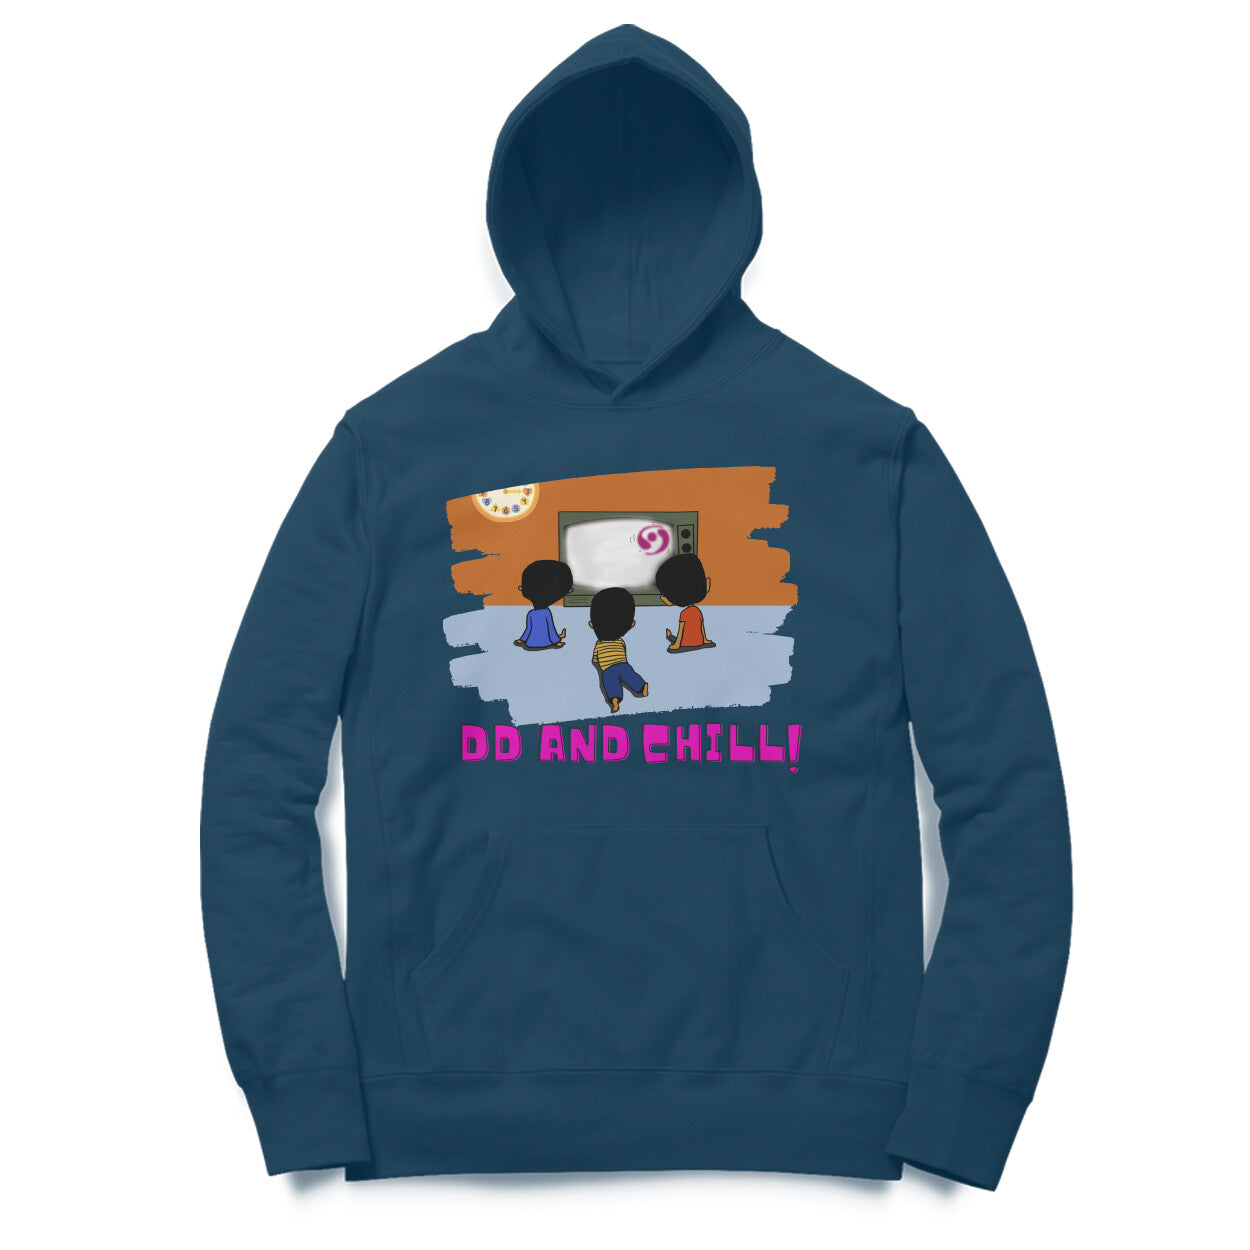 Bilkool DD and Chill With Friends Cotton Hoodies